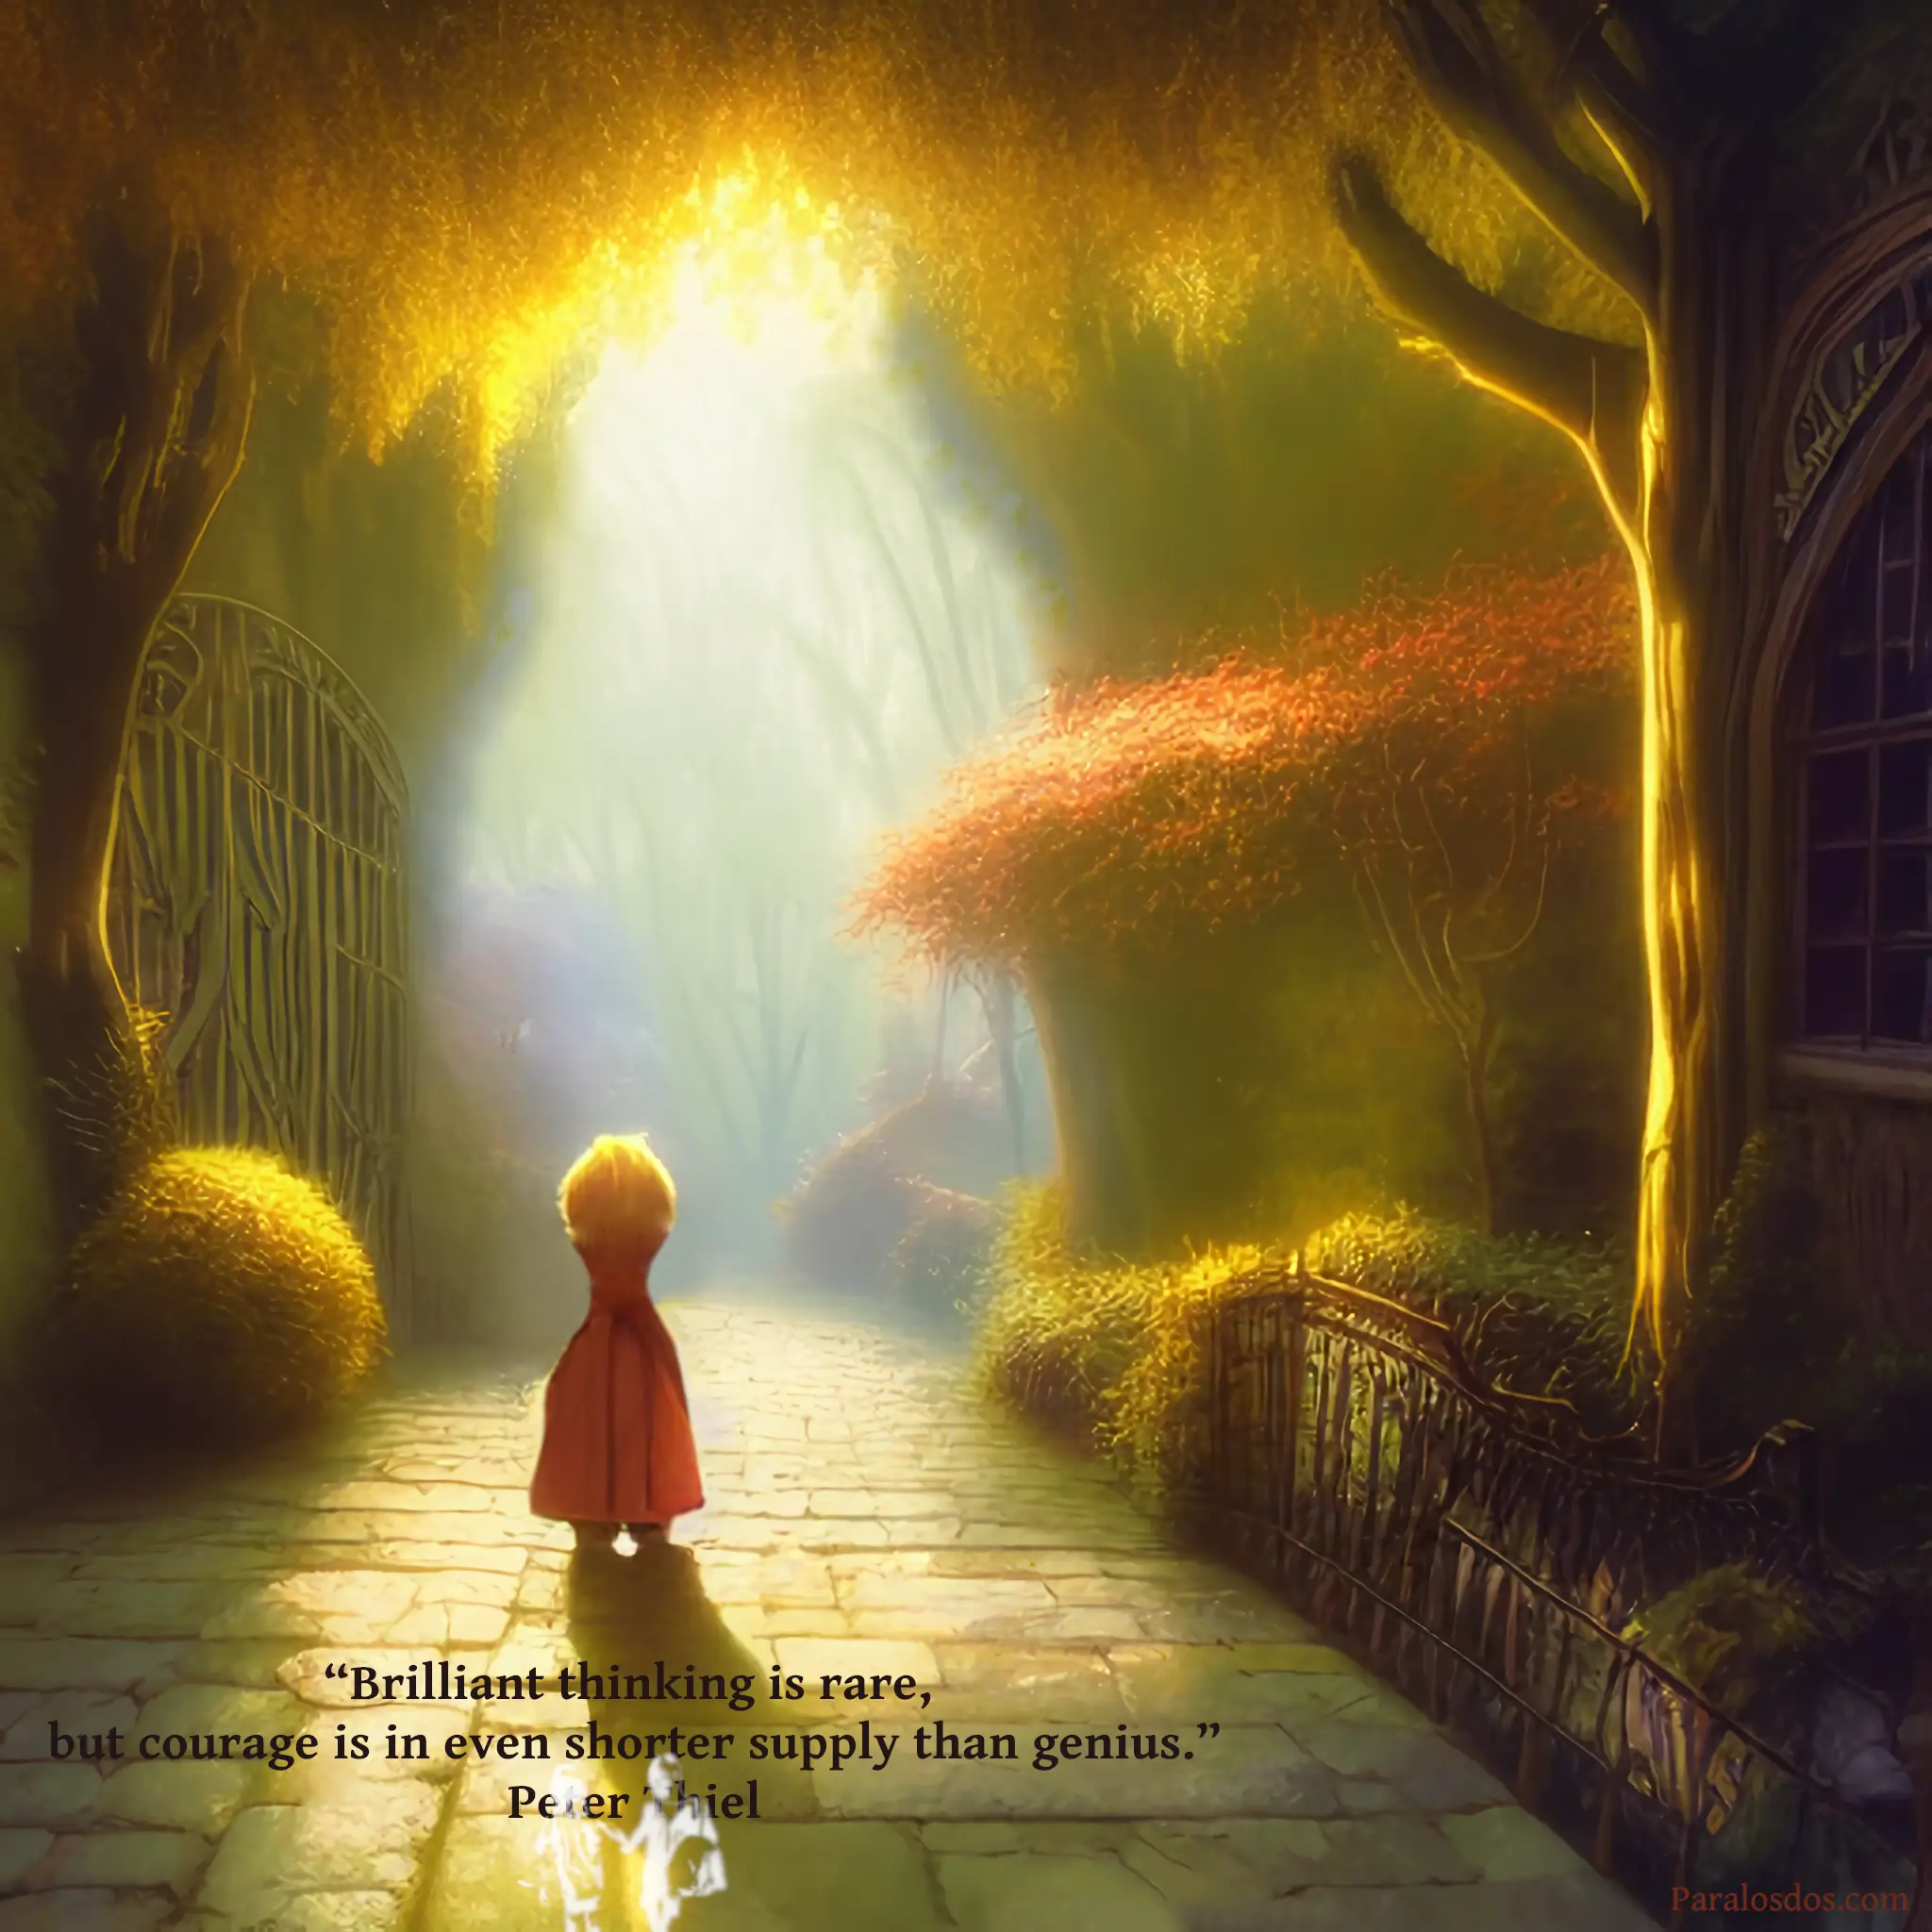 An artistic rendering of a figure on a village path walking towards a light filled gap in a woods. The quote reads: “Brilliant thinking is rare, but courage is in even shorter supply than genius.” Peter Thiel